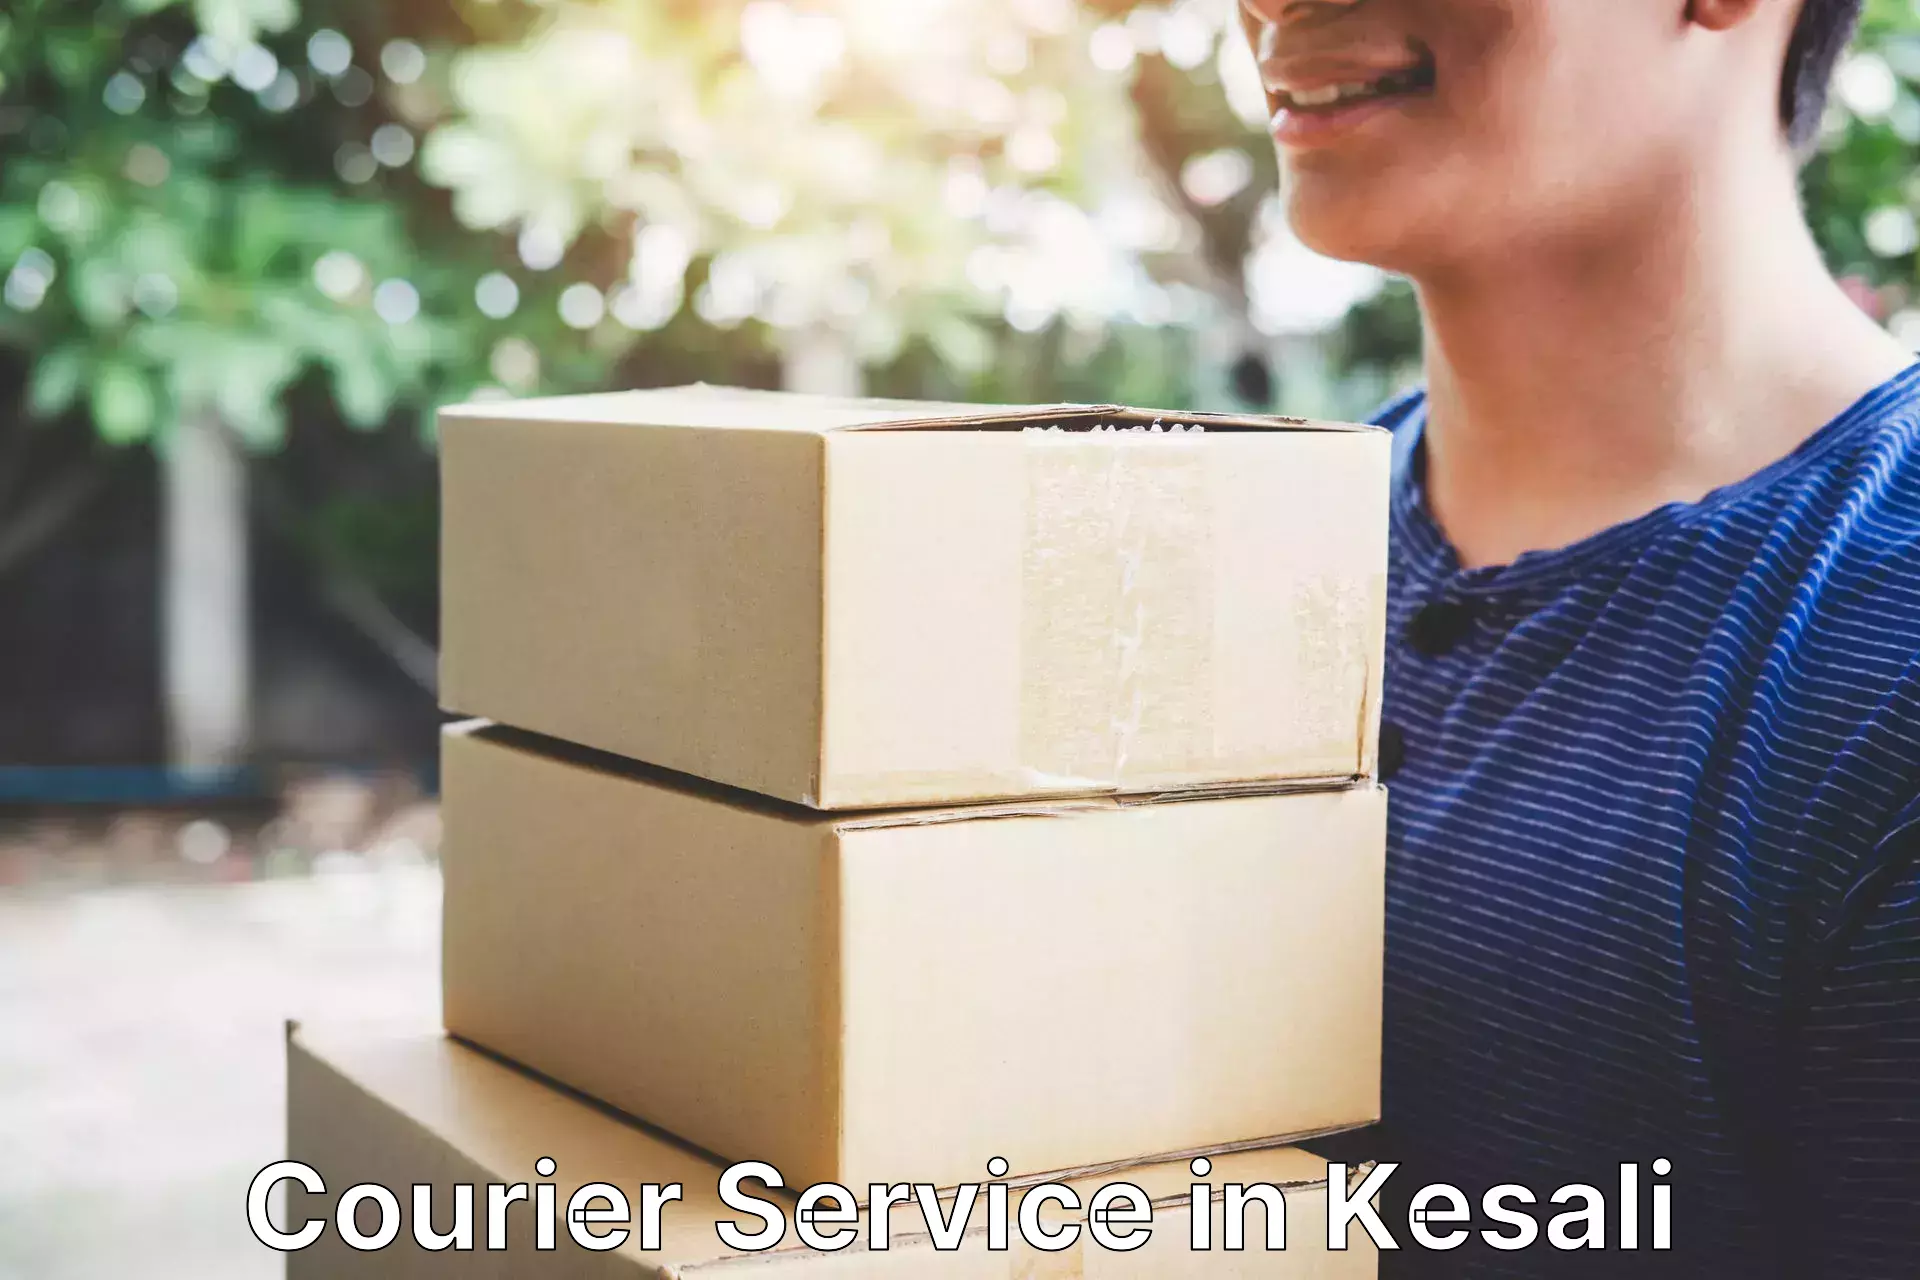 24-hour delivery options in Kesali